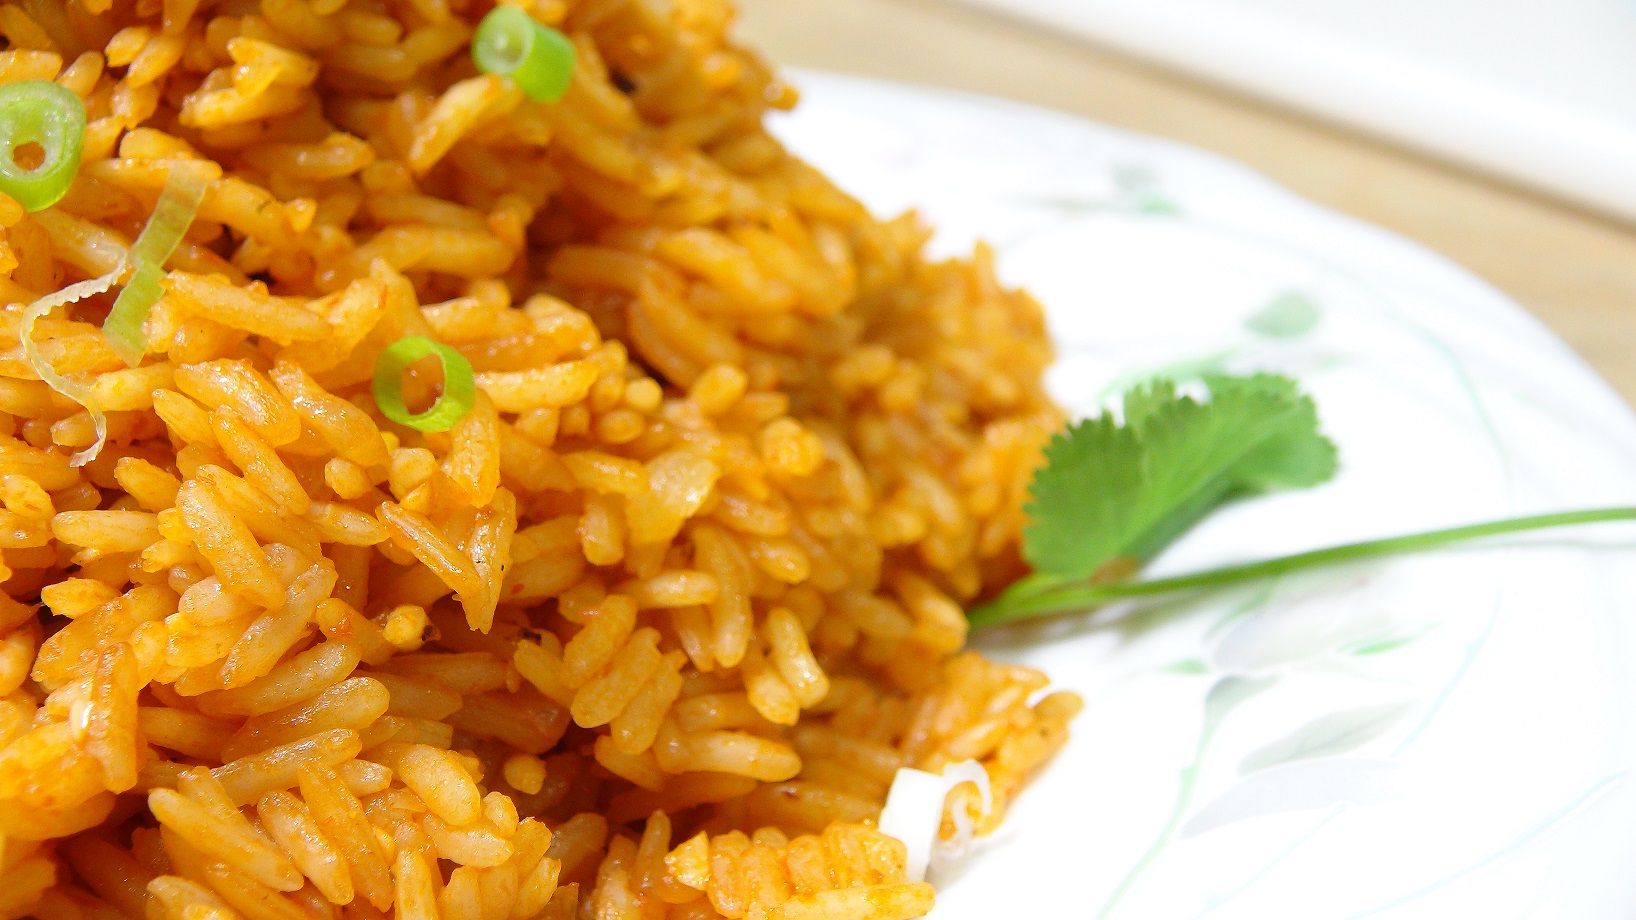 How To Make Spanish Rice - Learn To Cook